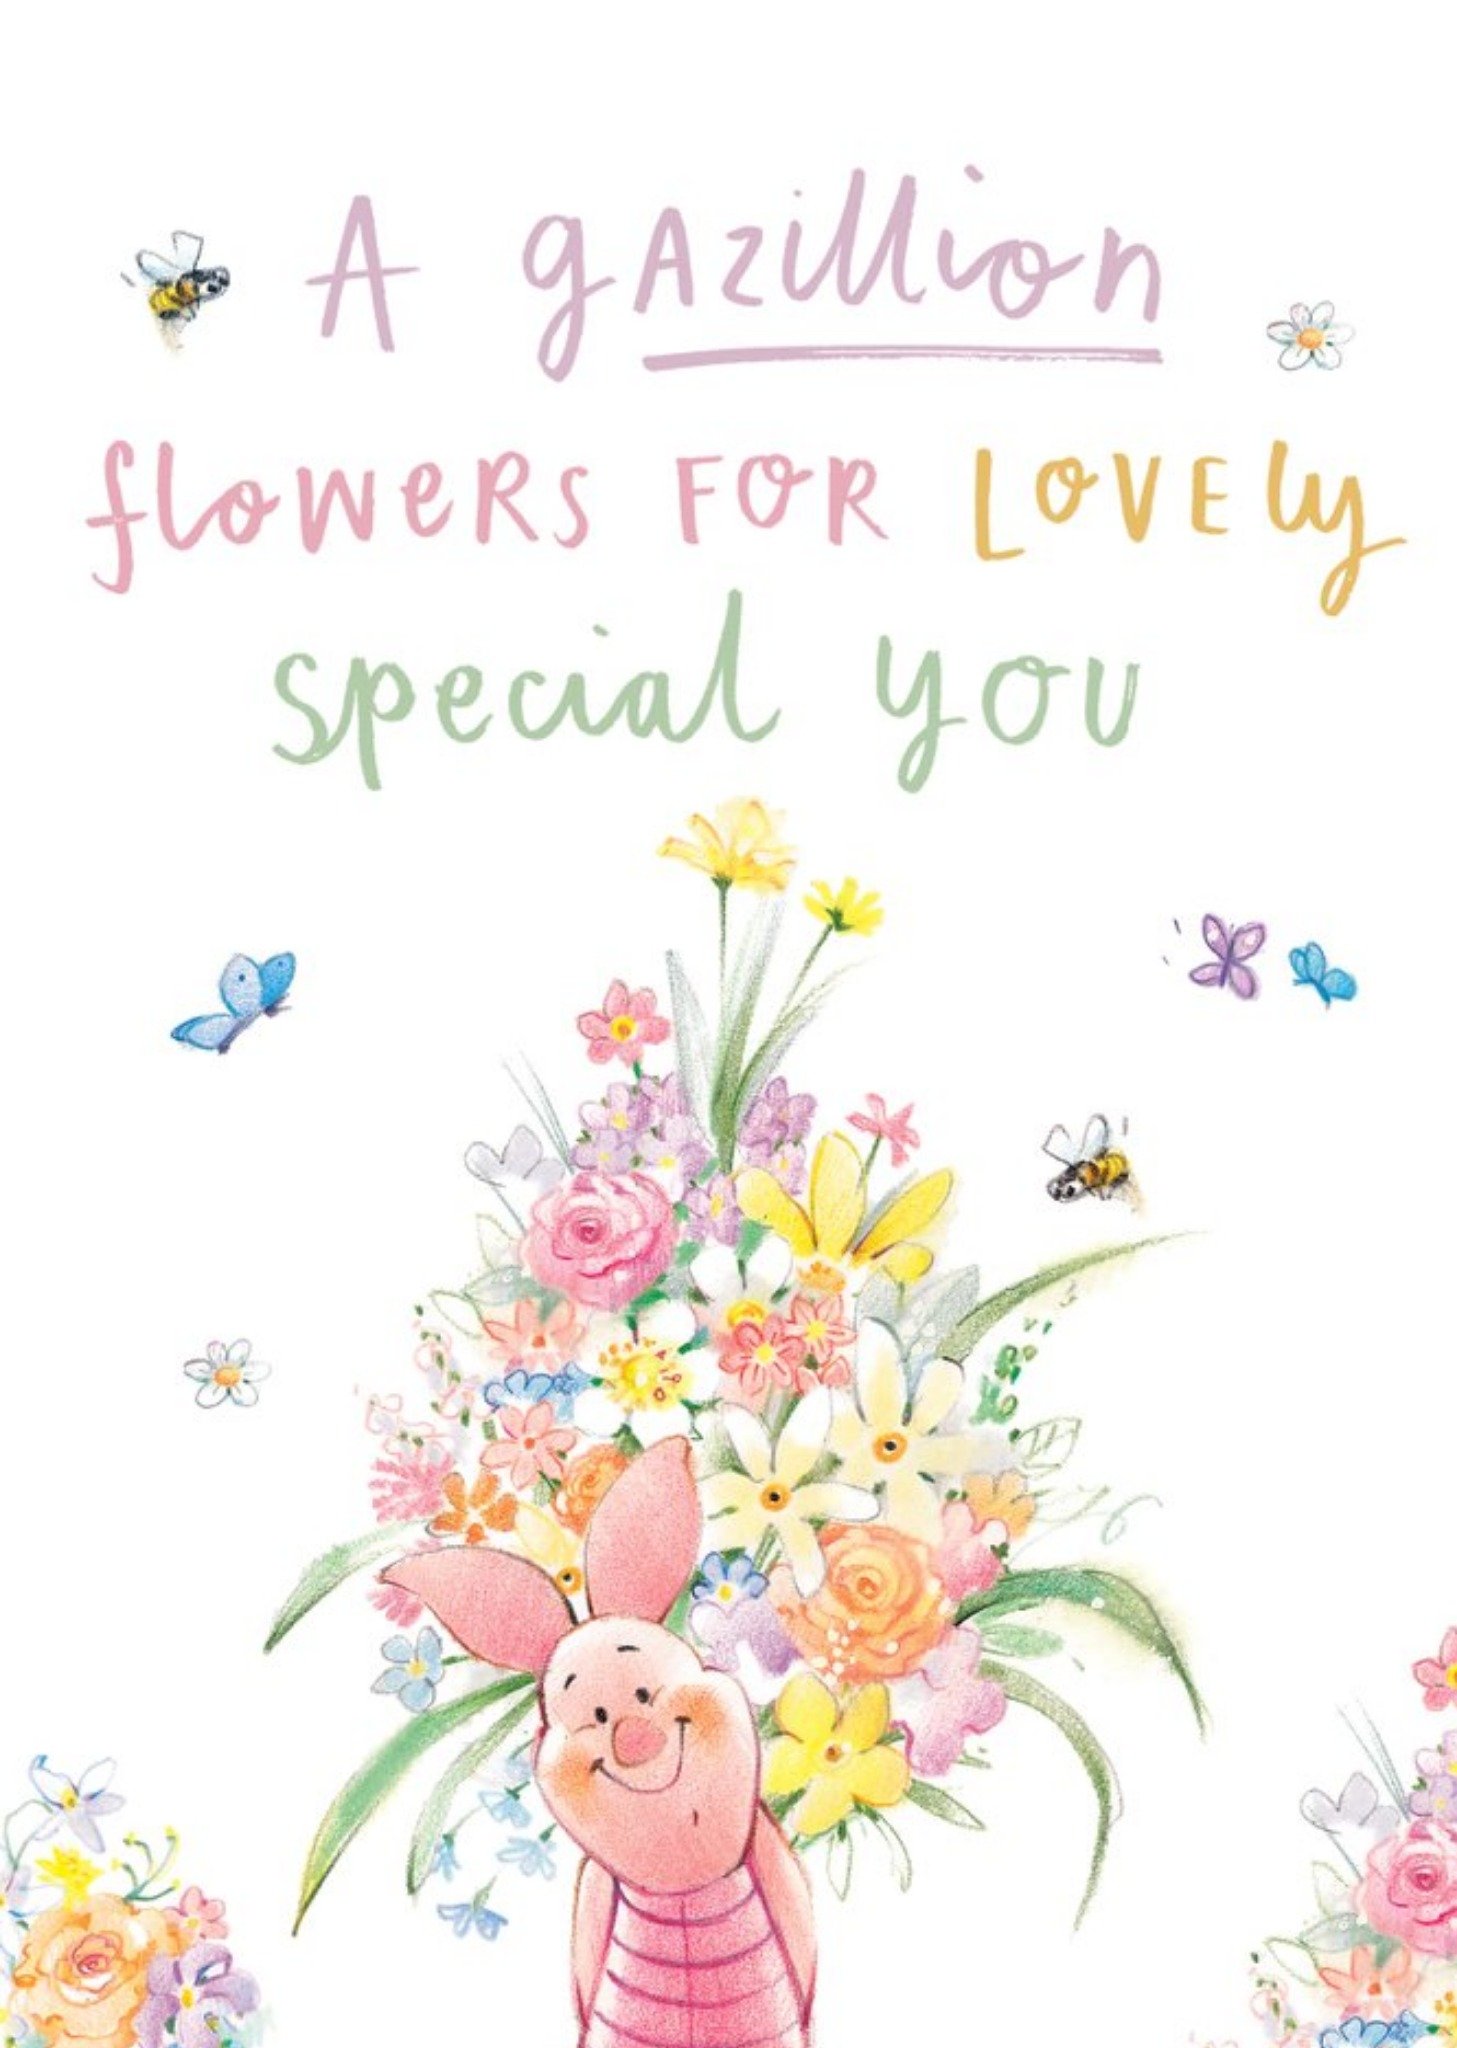 Winnie The Pooh A Gazillion Flowers For Lovely Special You Card Ecard